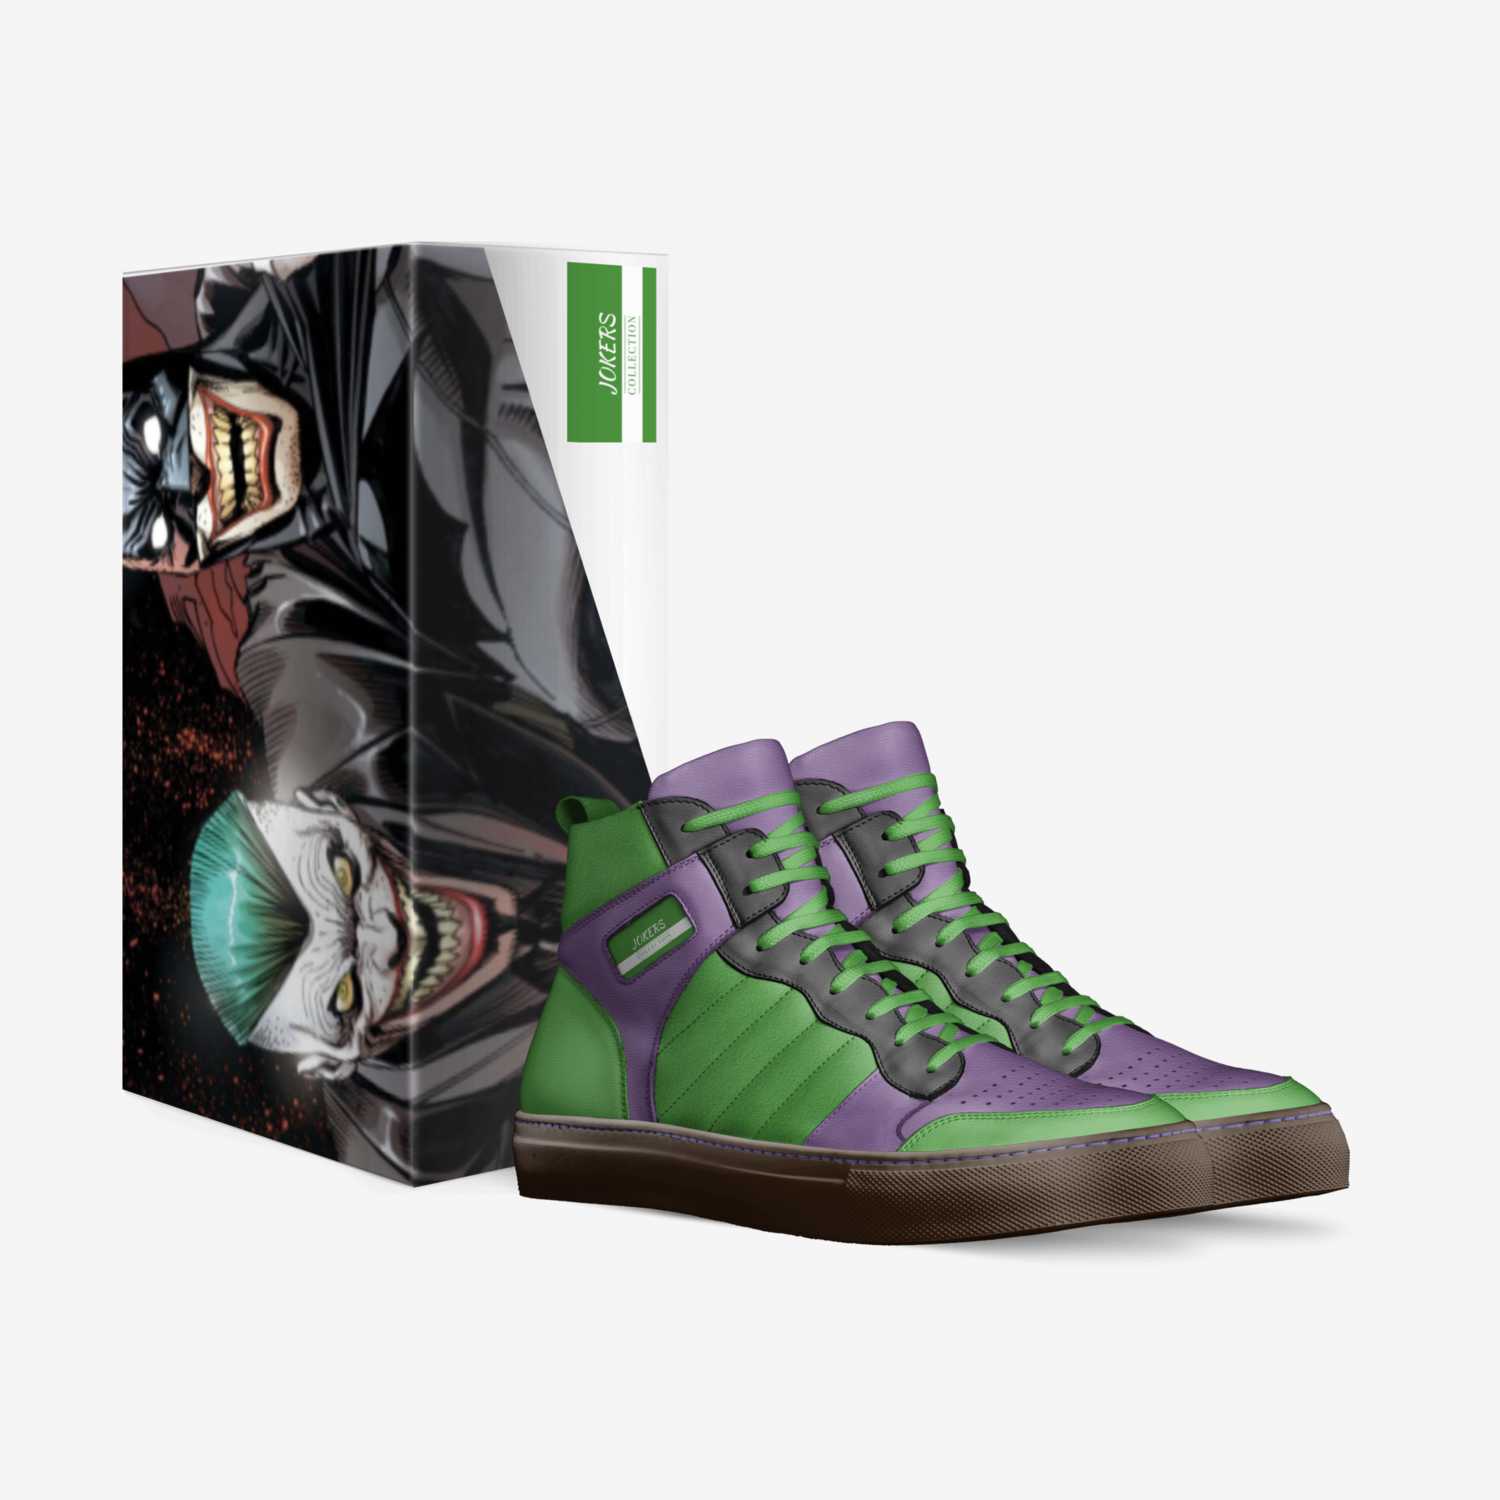 JOKERS custom made in Italy shoes by Mike | Box view